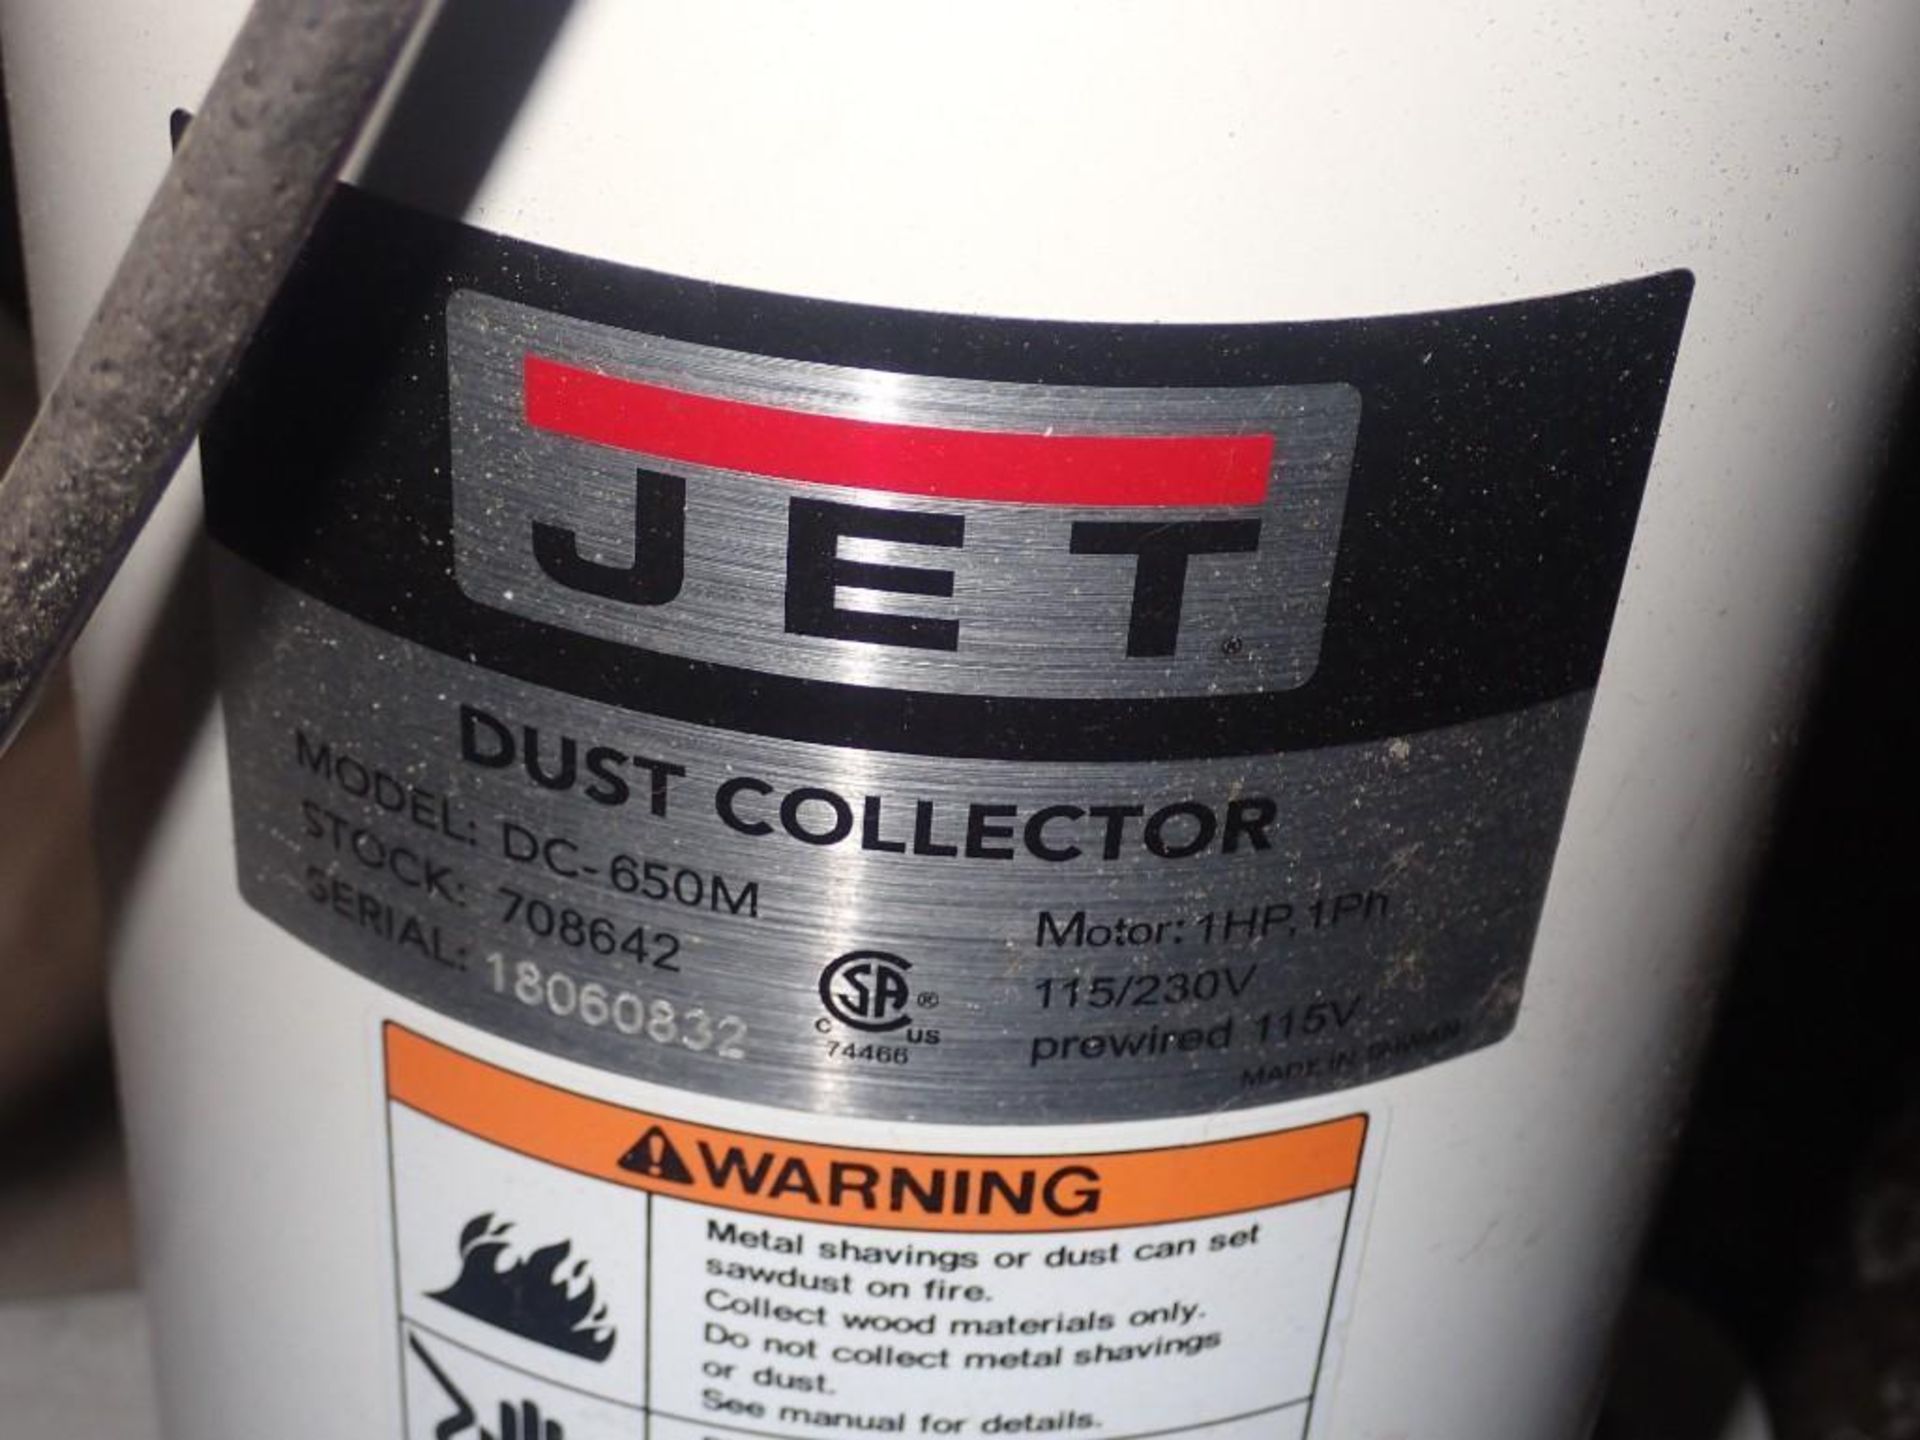 Jet #DC-650M Dust Collector - Image 4 of 4